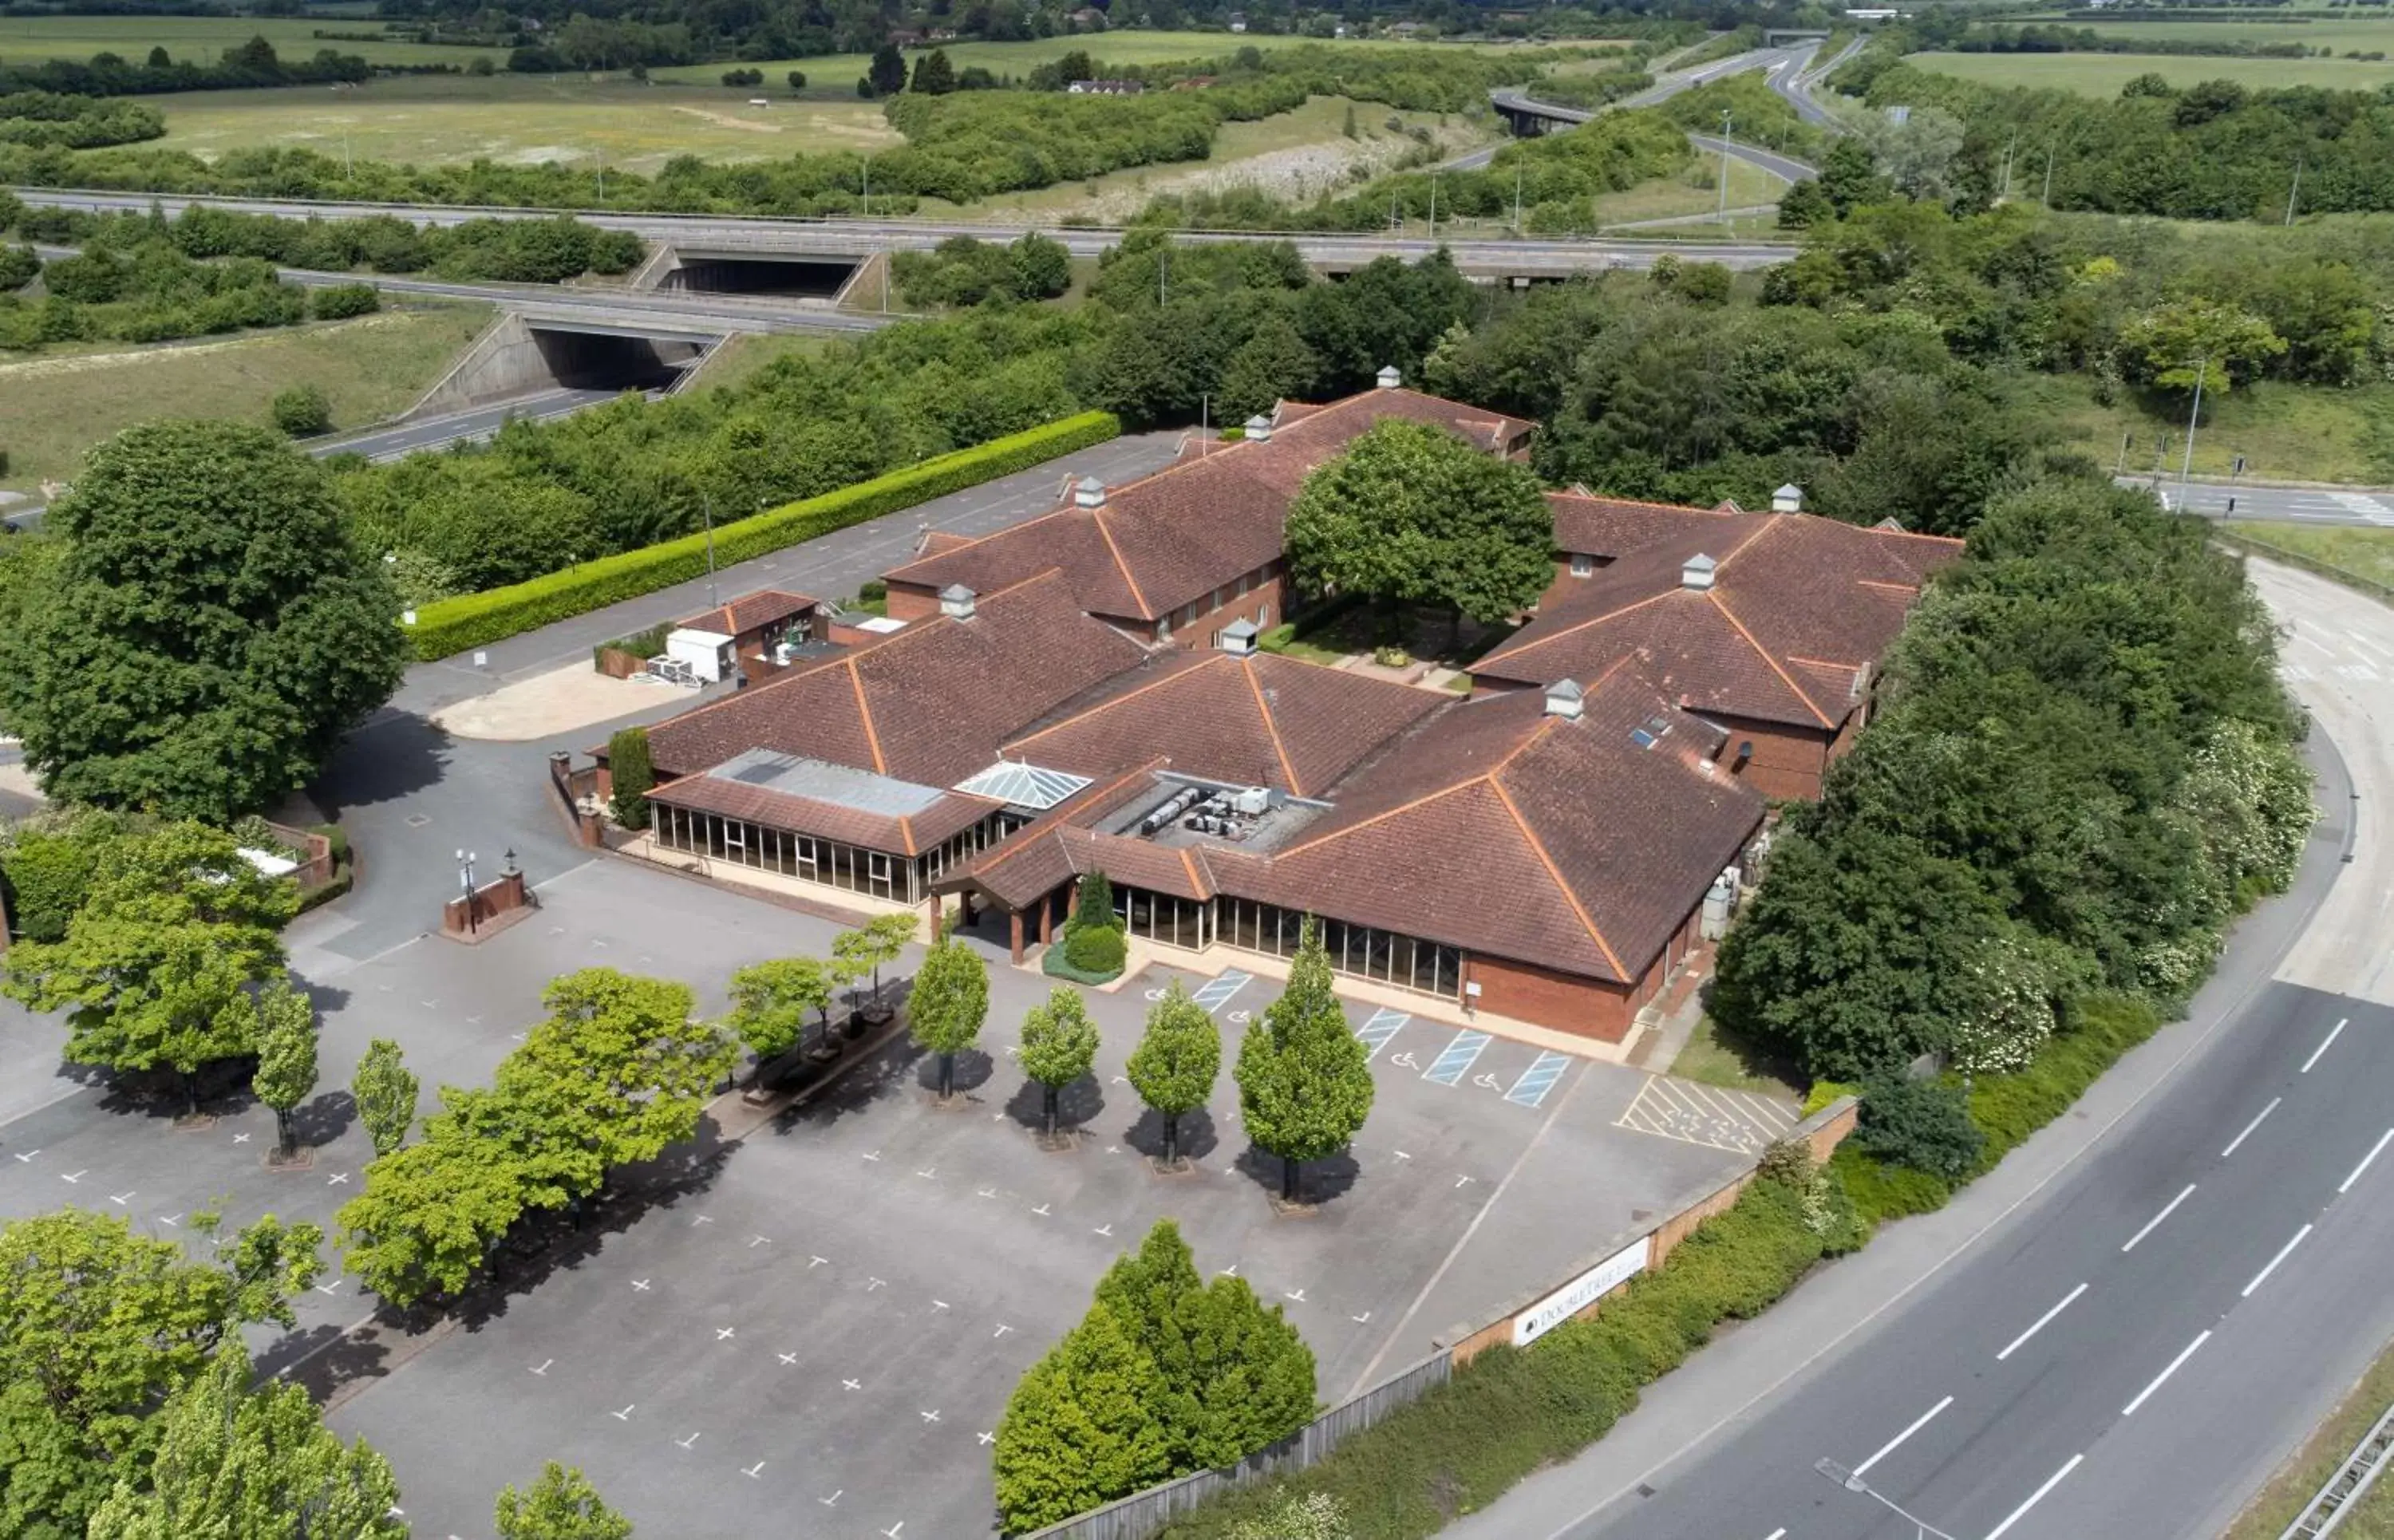 Property building, Bird's-eye View in DoubleTree by Hilton Newbury North